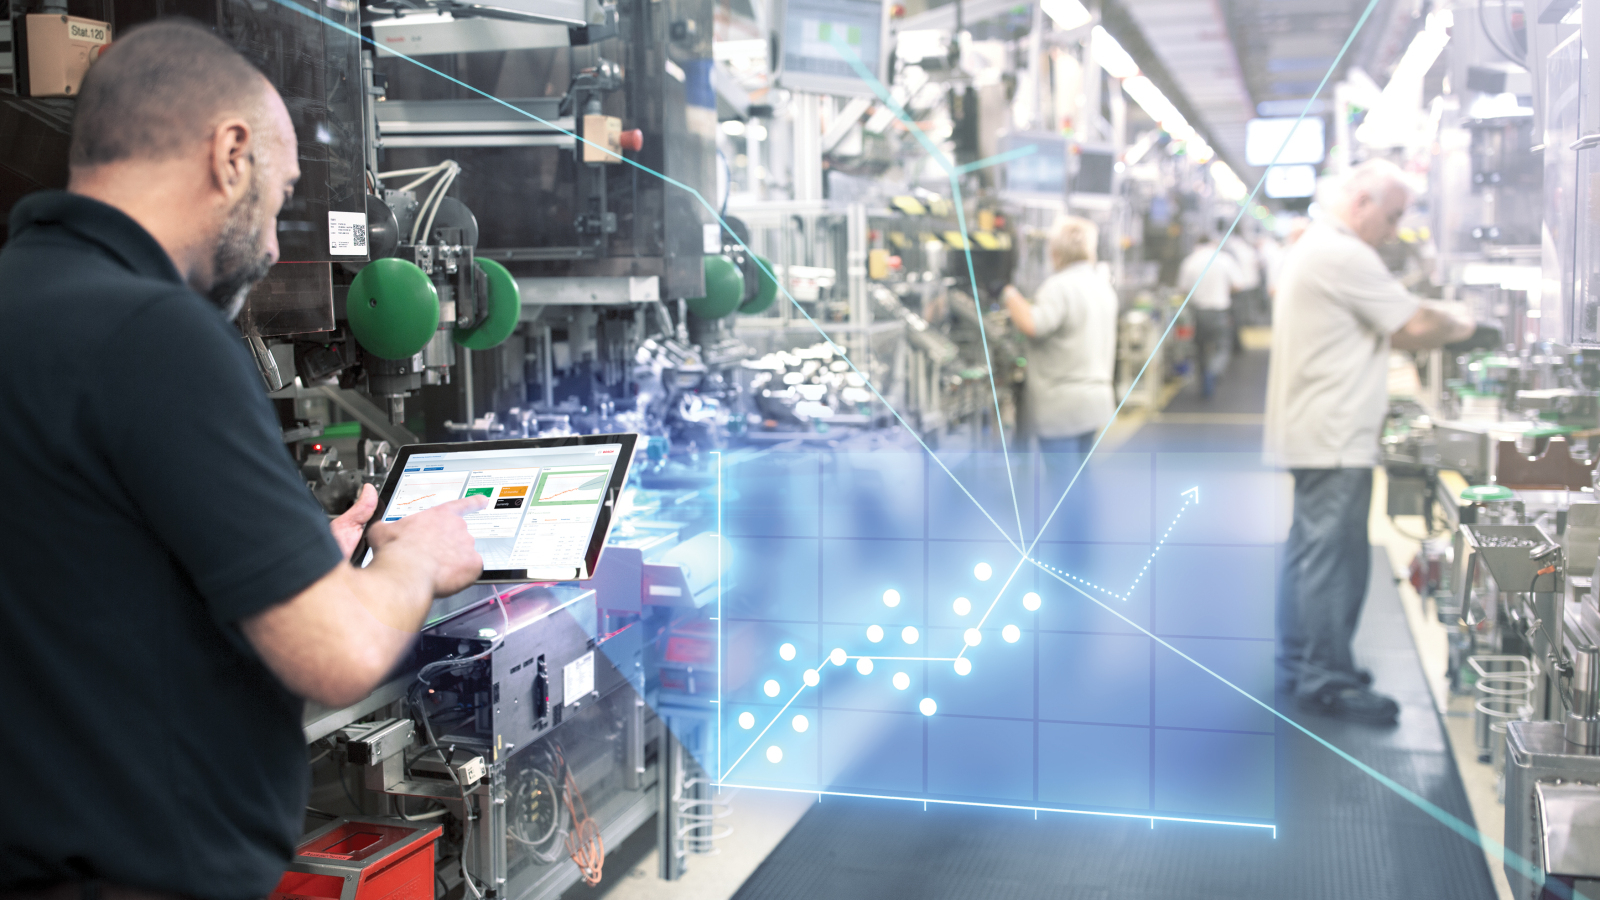 Industrial technology offers enormous growth potential for Bosch